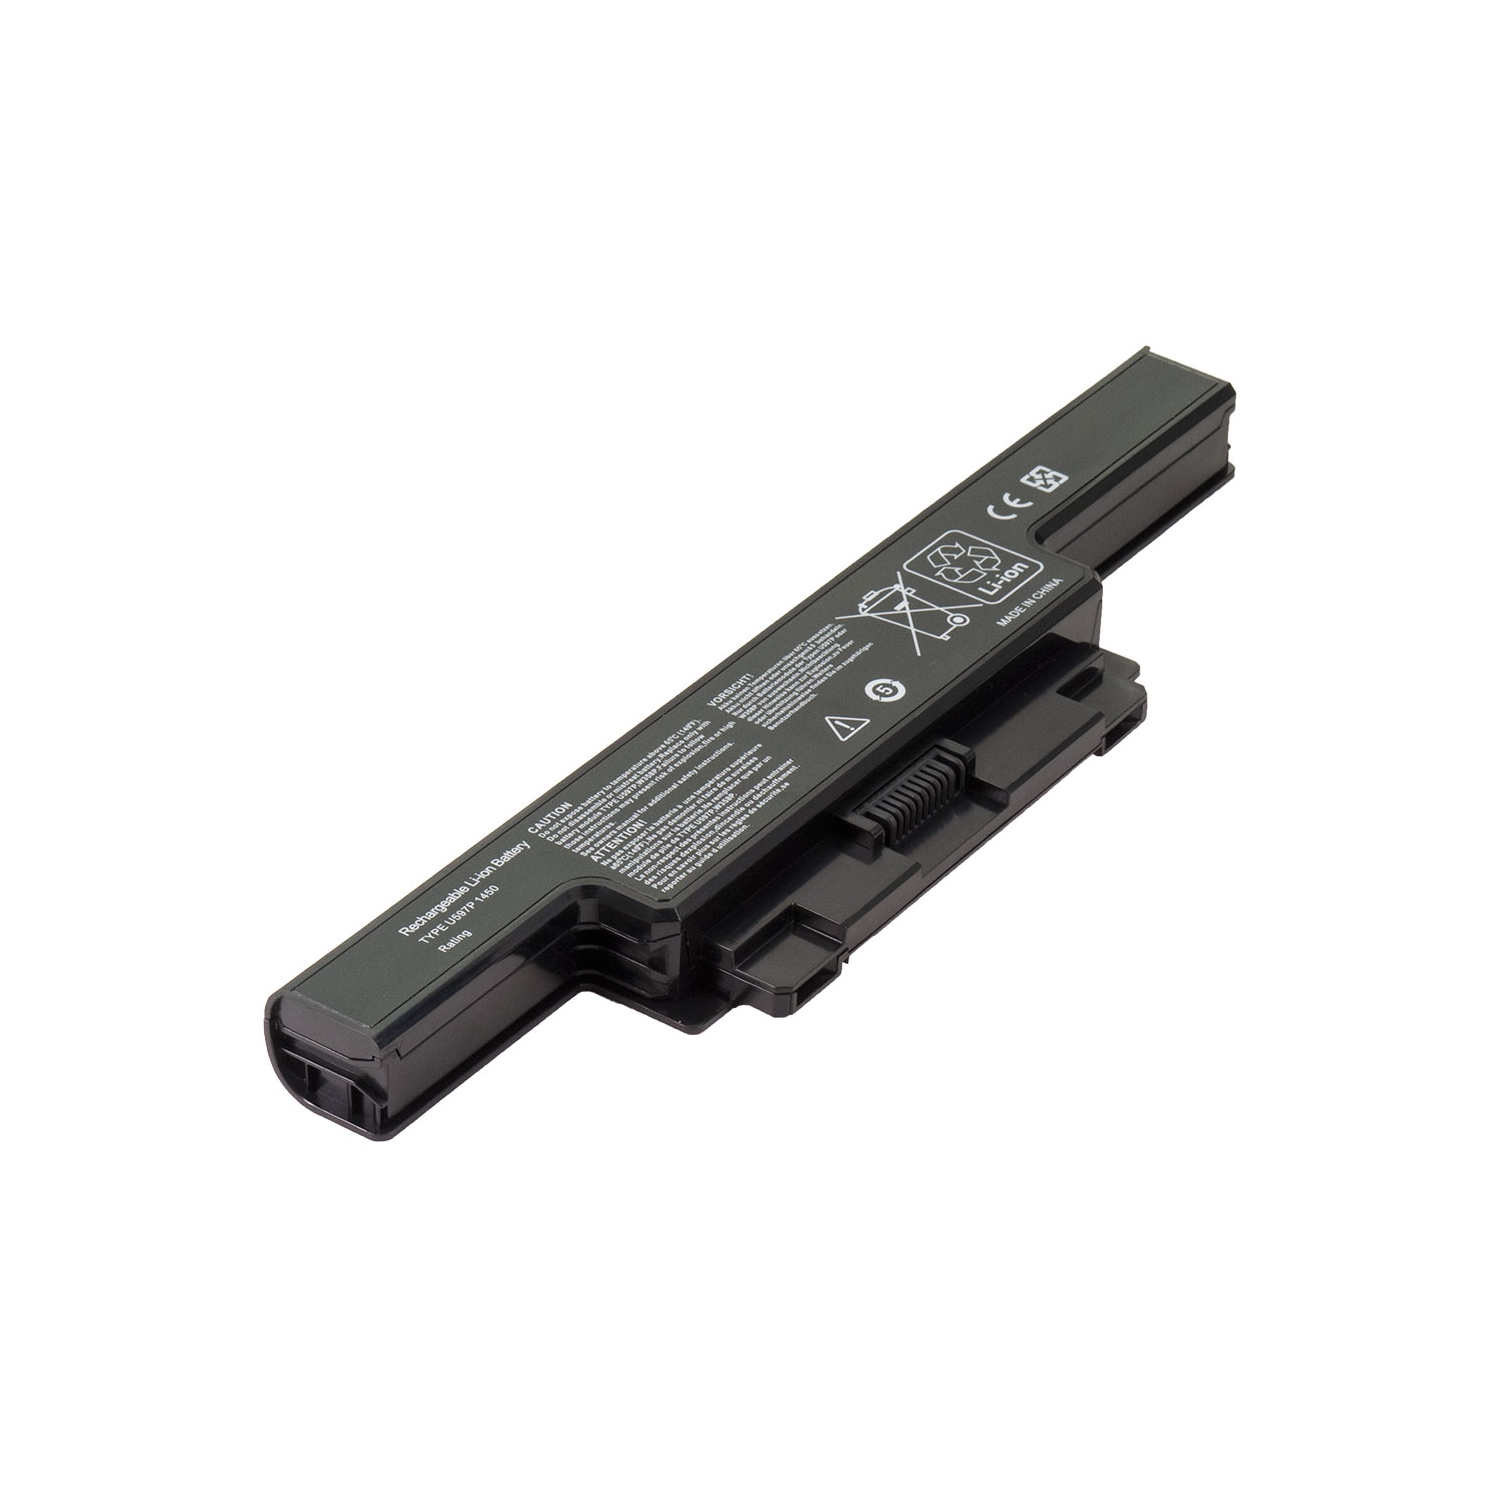 Laptop Battery Replacement for Dell Studio 1450, 312-4000, N996P, P219P, W356P, Y210P